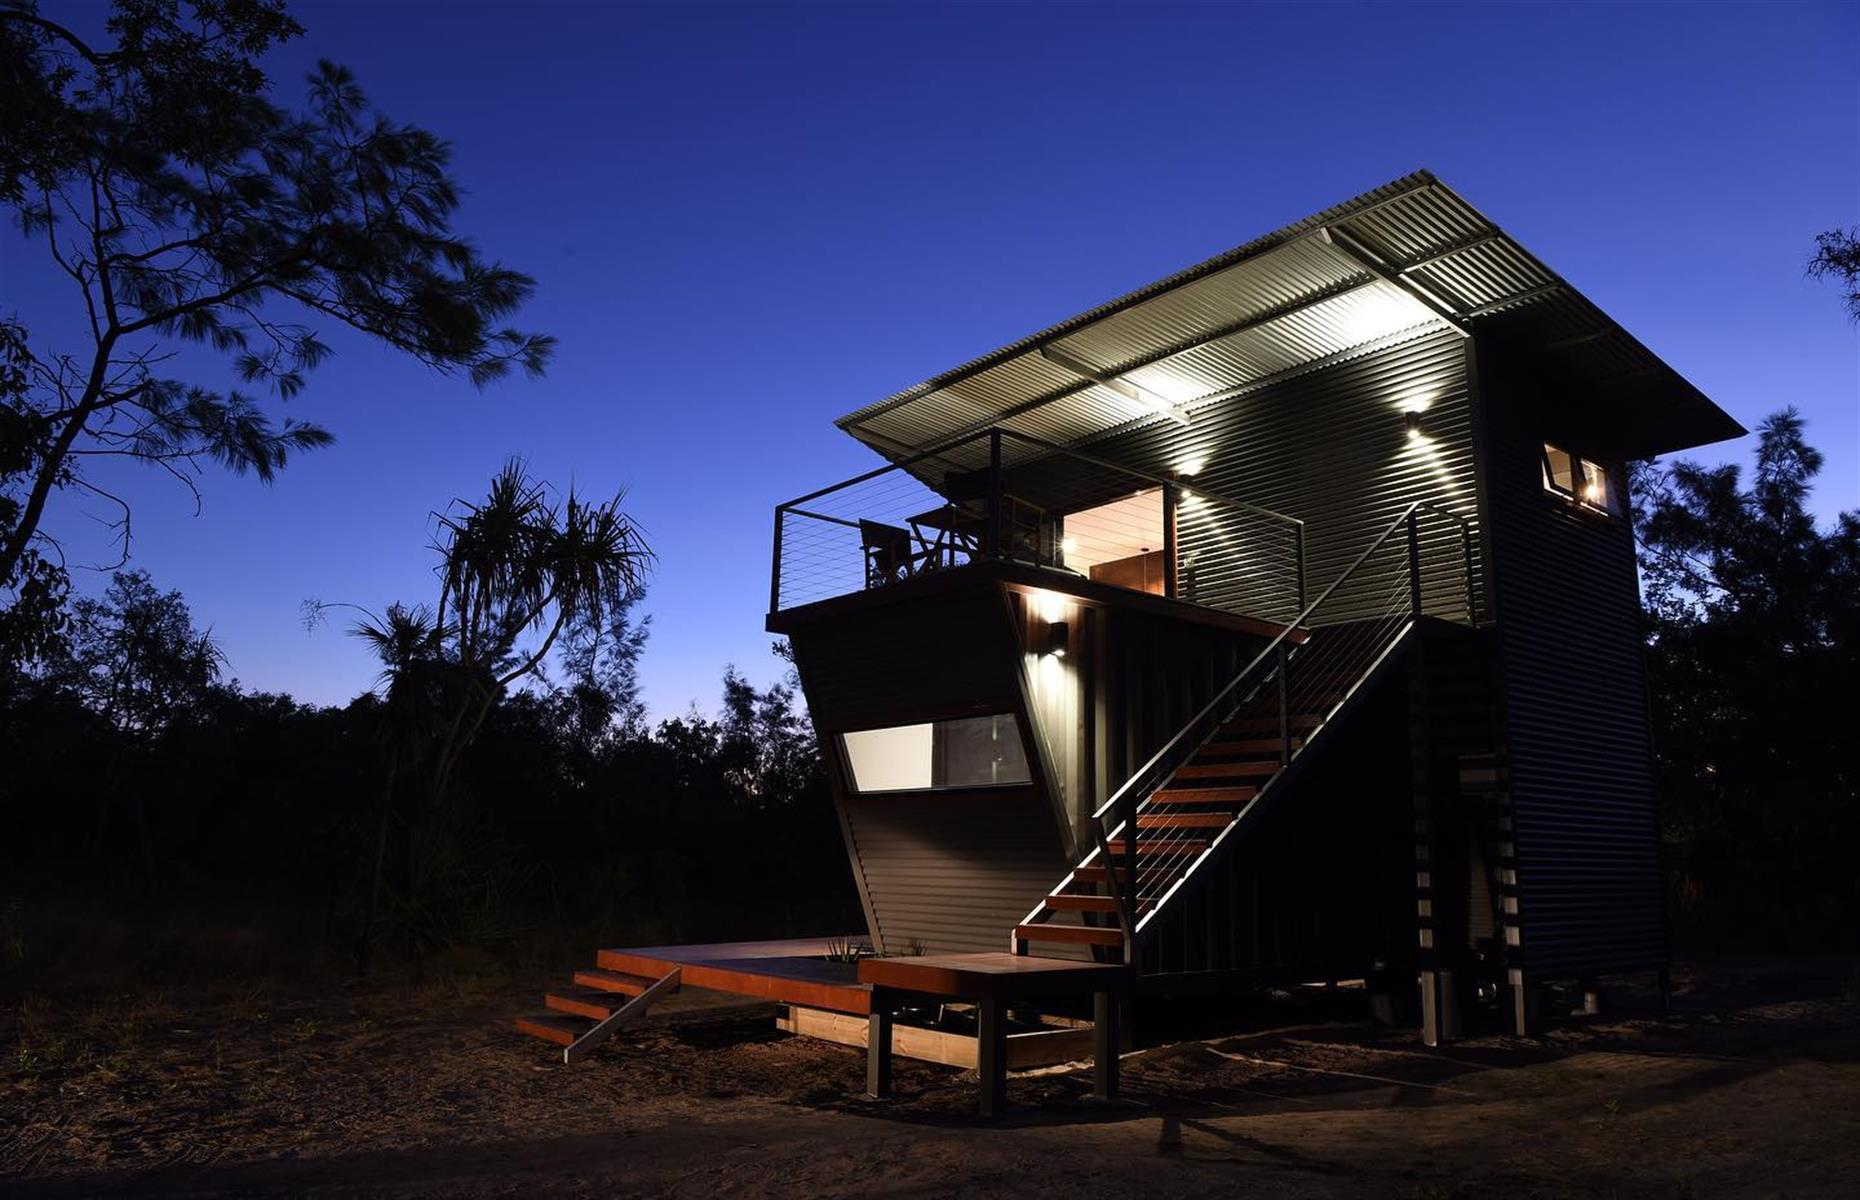 <p>Hidden away in a remote corner near the enchanting waterfalls and swimming holes of Litchfield National Park are three chic eco-cabins that are entirely made from old shipping containers. <a href="https://www.hideawaylitchfield.com">Hideaway Litchfield's</a> three solar-powered cabins not only look striking but are exceedingly well appointed, with all the comforts of a boutique B&B. With nothing but native bushland all around, a stay here is about giving in to the rhythm of nature.</p>  <p><strong><a href="https://www.loveexploring.com/galleries/100339/australias-most-beautiful-national-parks?page=1">These are Australia's most beautiful national parks</a></strong></p>